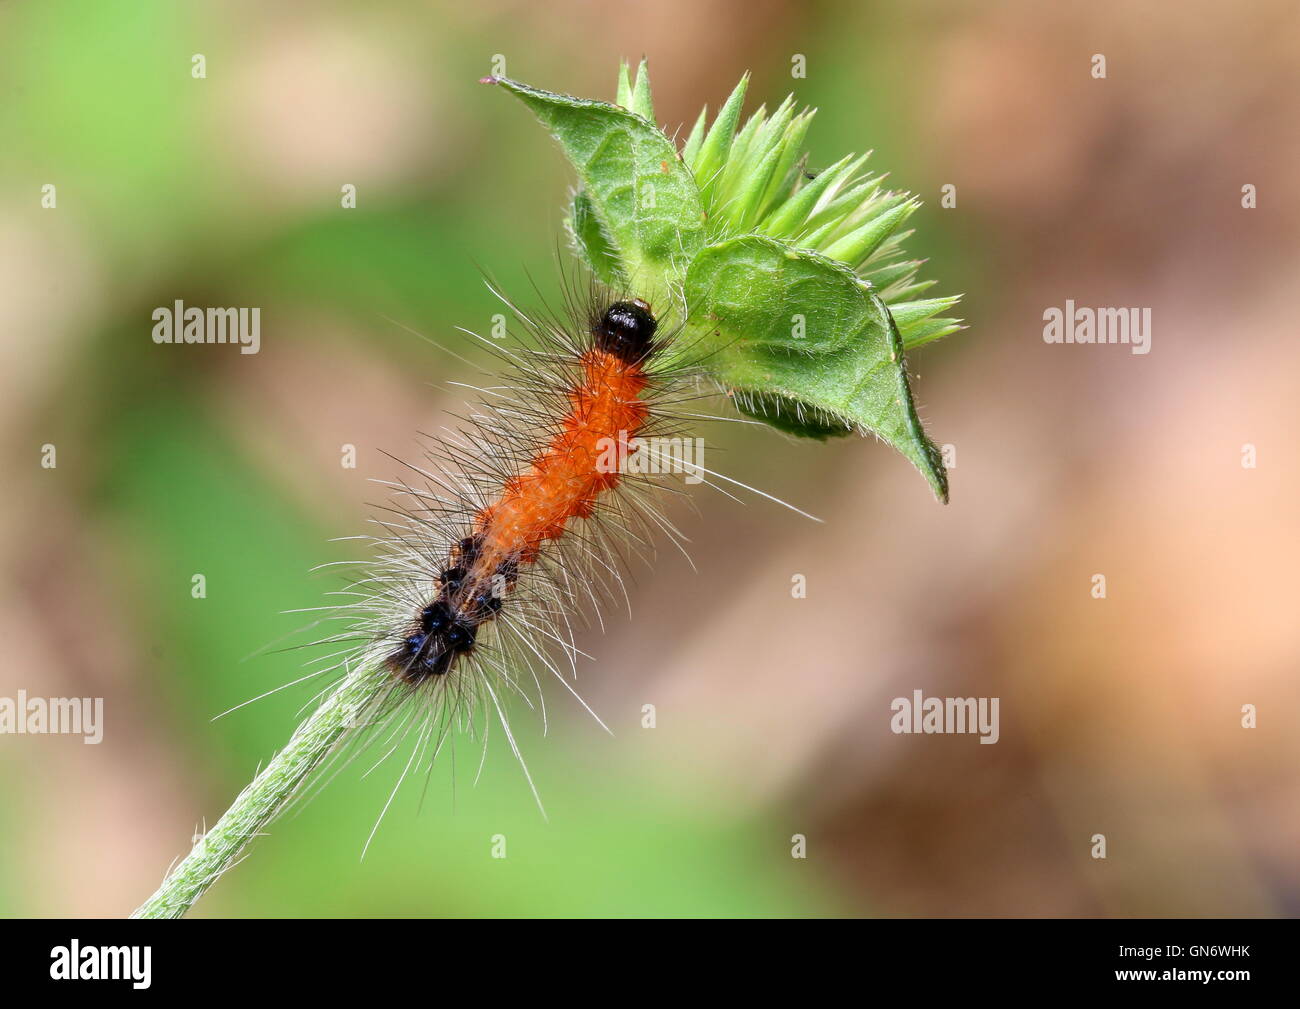 Hairy red caterpillar with black head and tail found in a tropical jungle Stock Photo